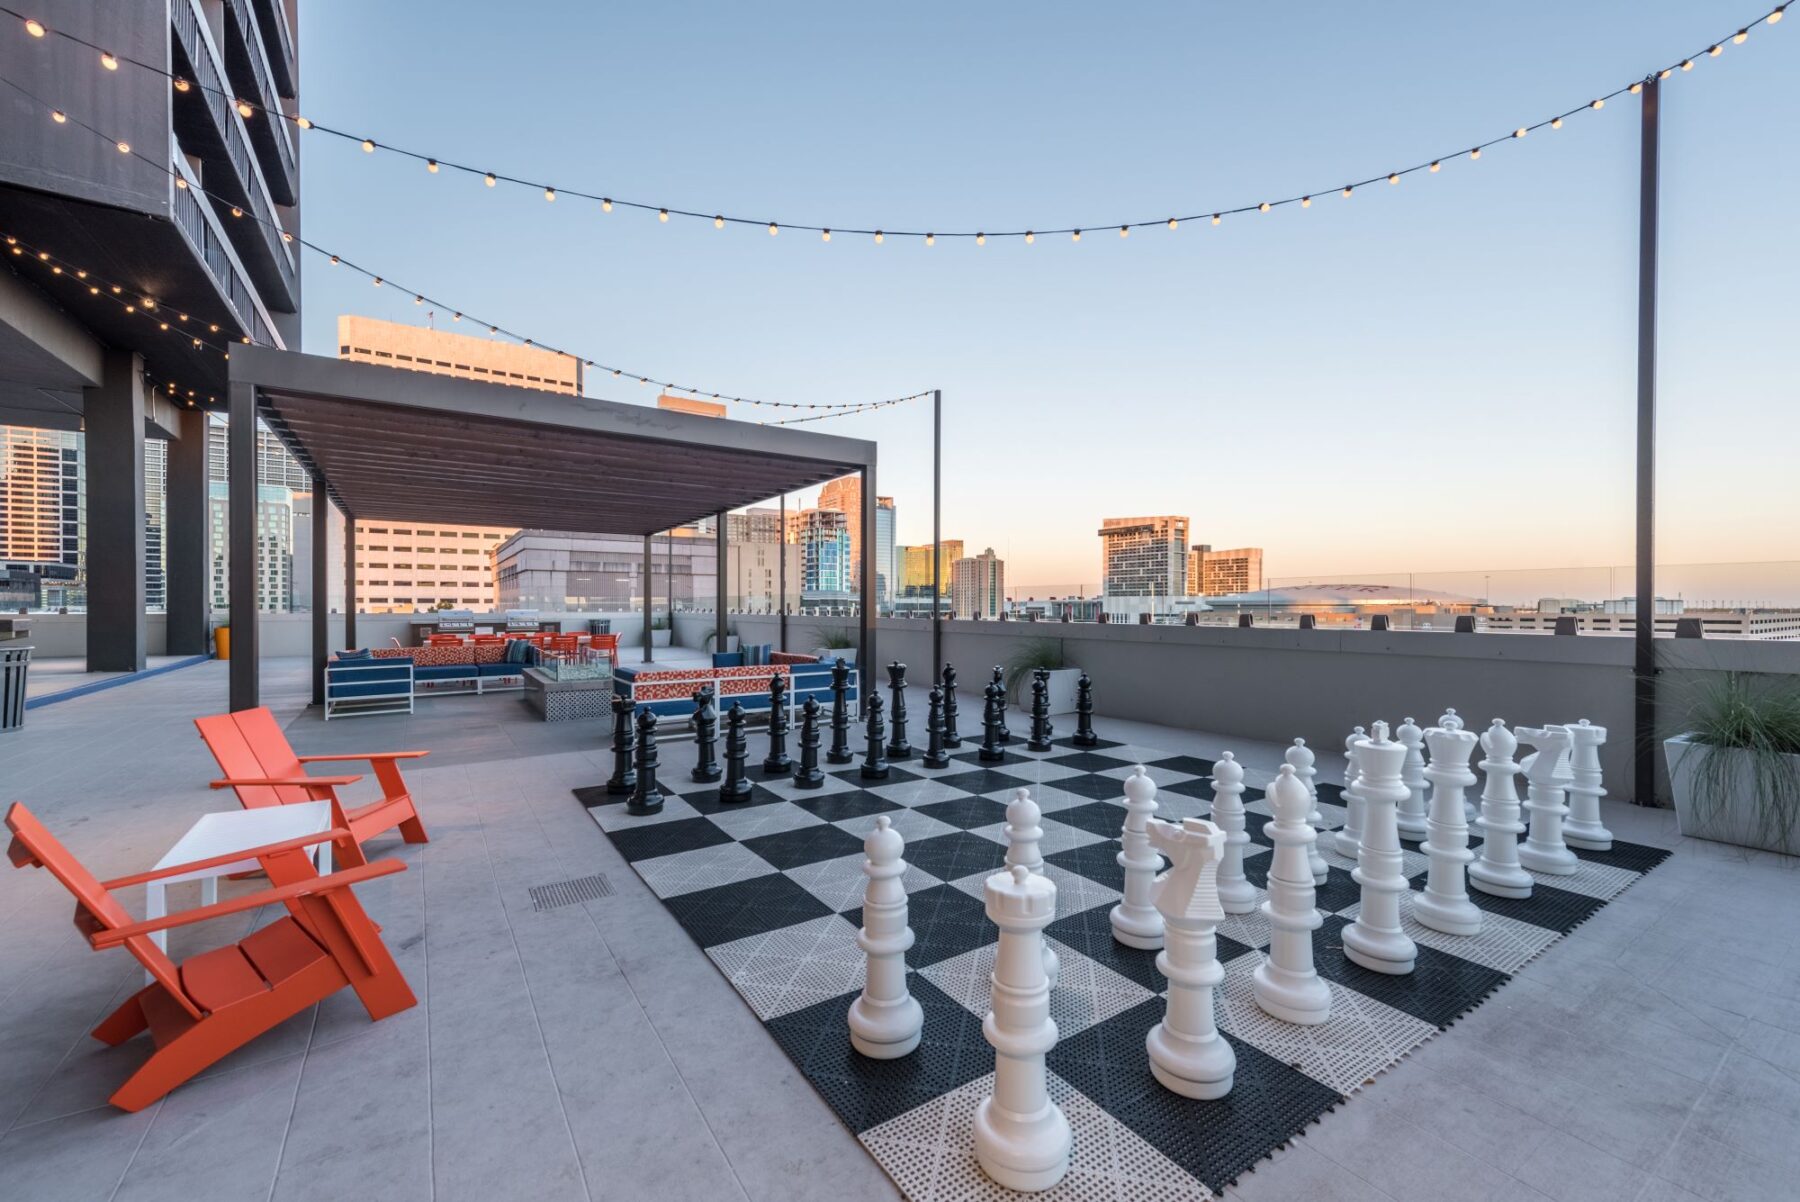 Rooftop patio with covered sitting area and giant chess game